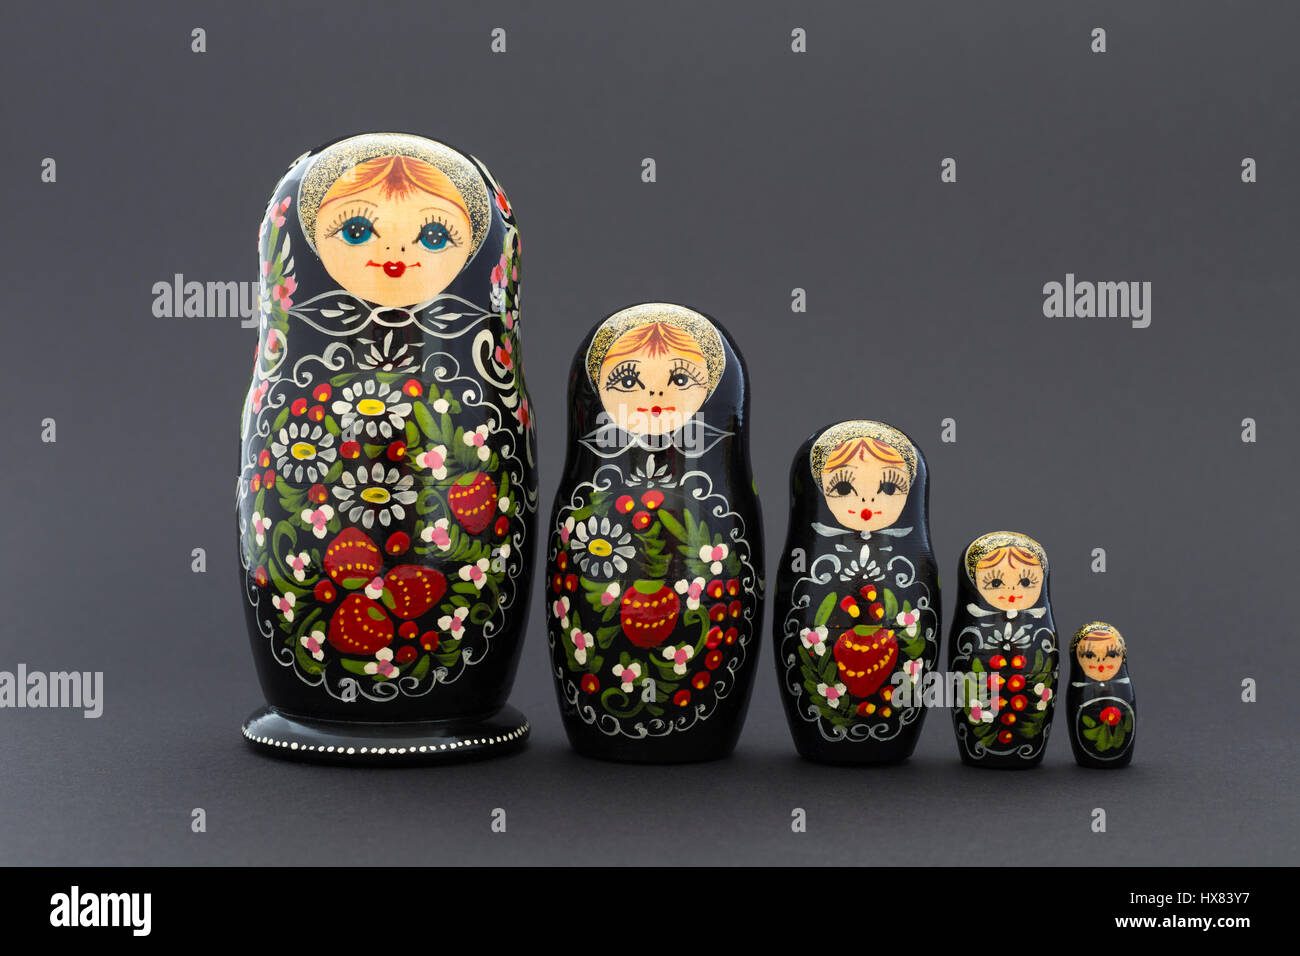 Beautiful black russian nesting dolls (matryoshka dolls) with white, green and red painting in front of dark background Stock Photo